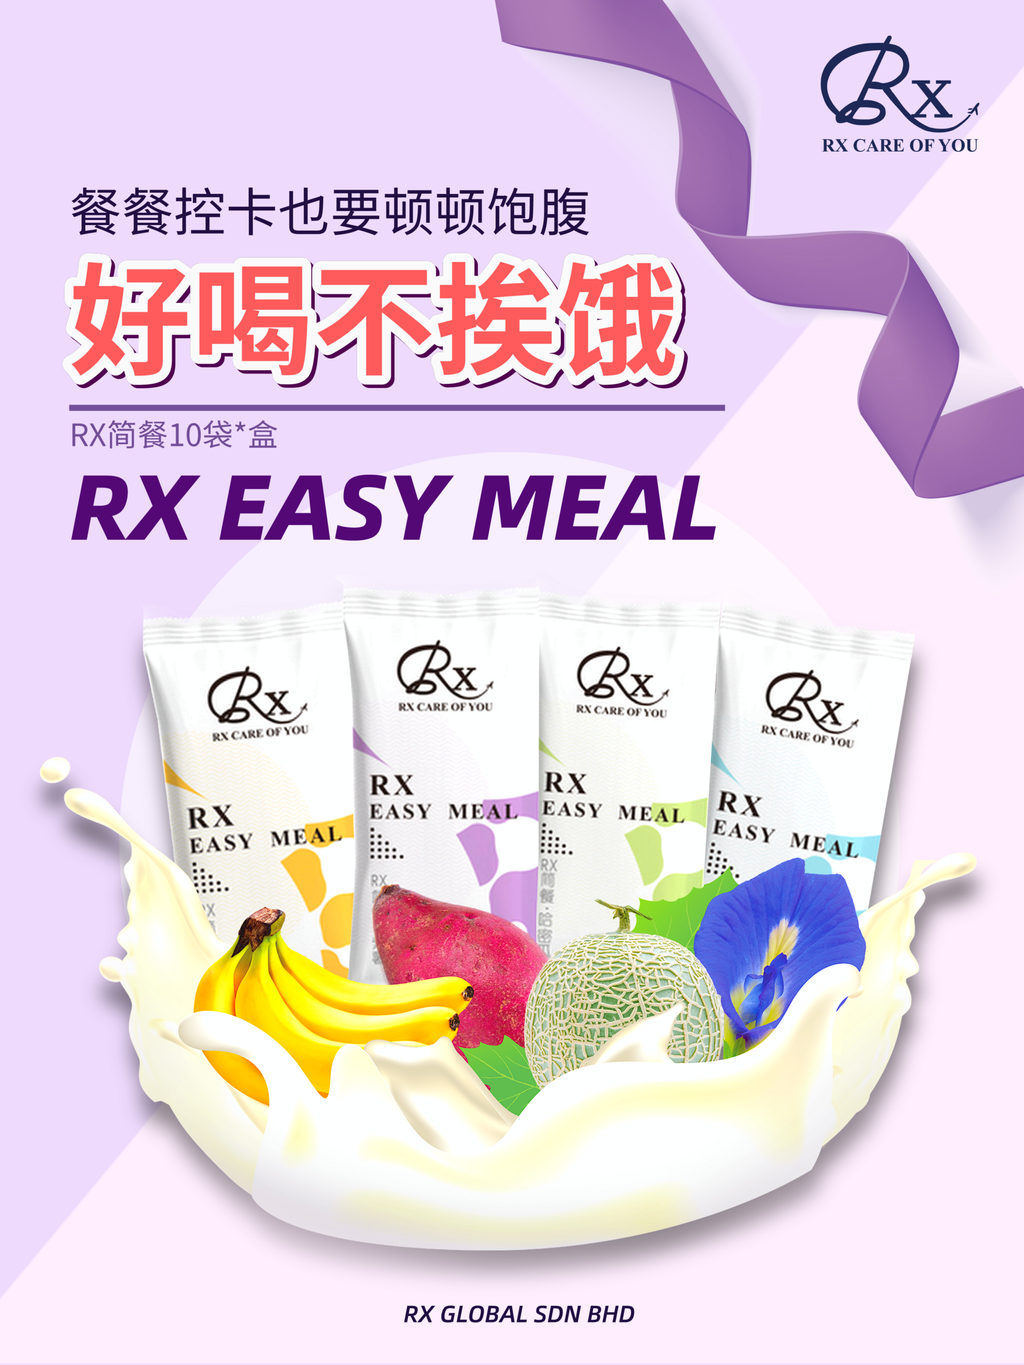 rx-easymeal.png